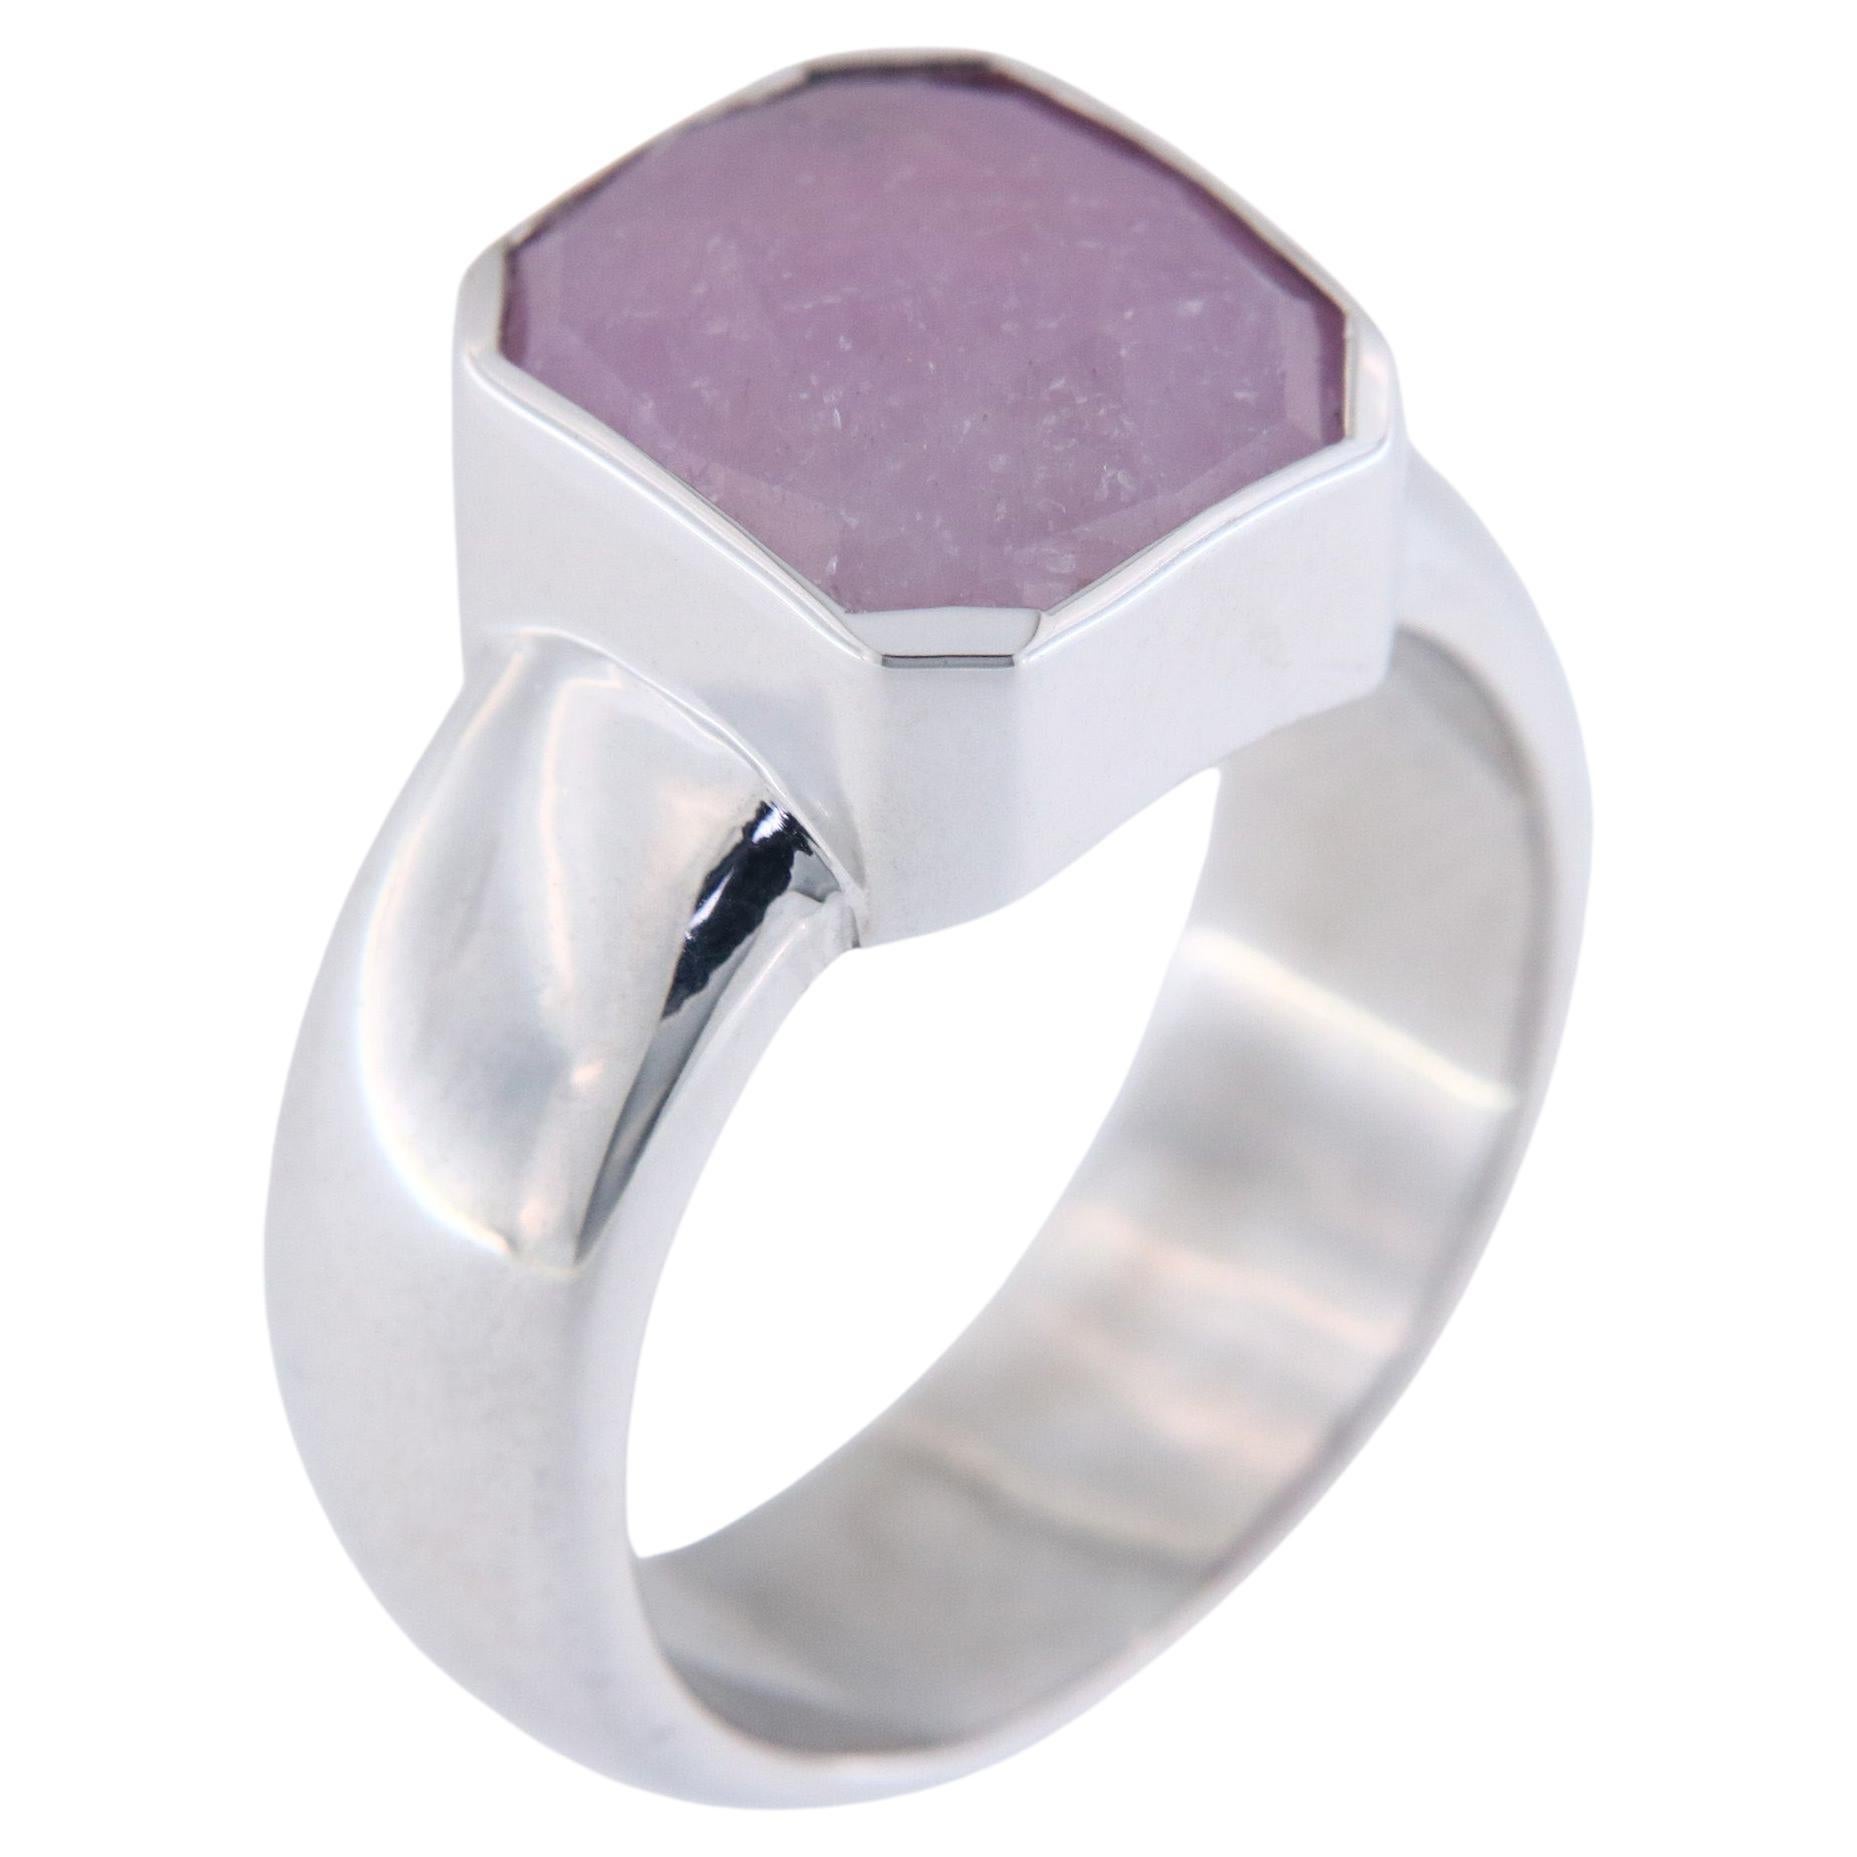 Orloff of Denmark, 12 ct Pink Sapphire Ring in 925 Sterling Silver